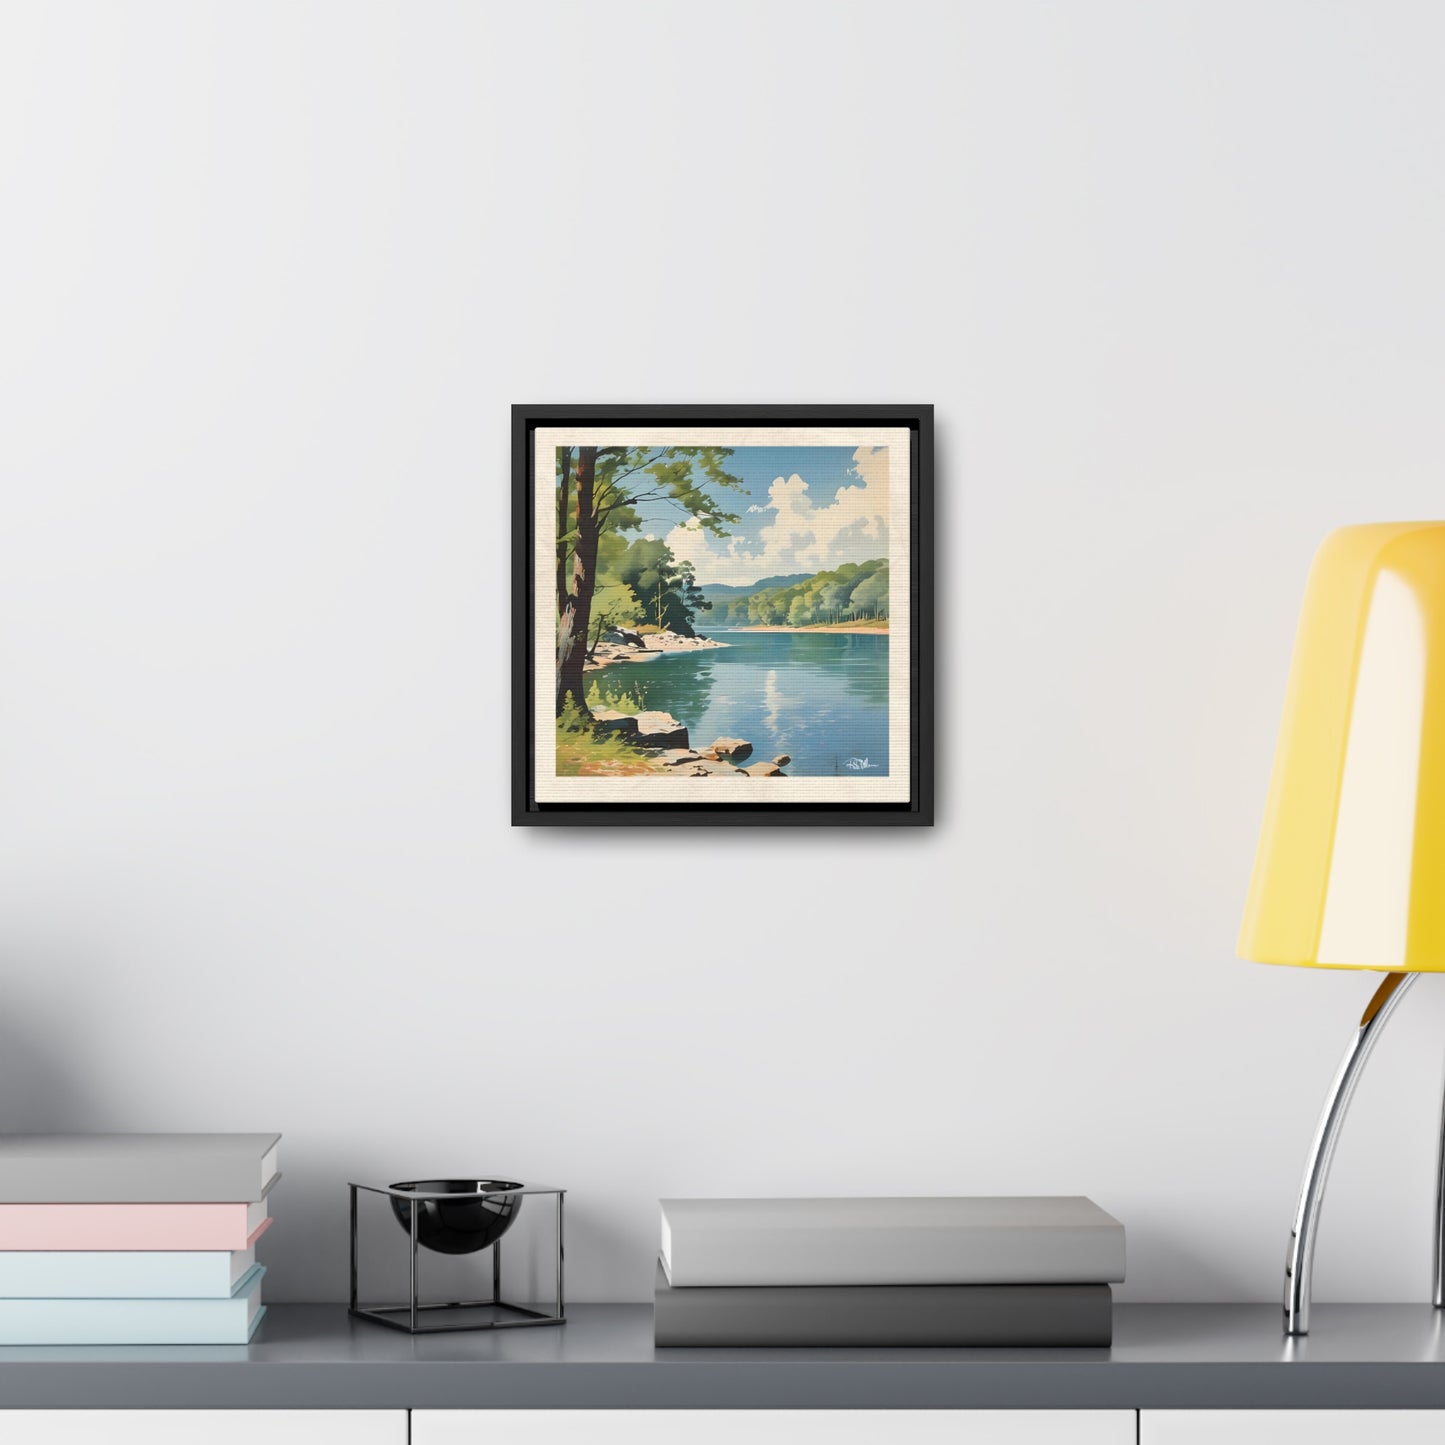 "Afternoon in the Cove" Gallery Canvas Wrap with Poplar Wood Frame